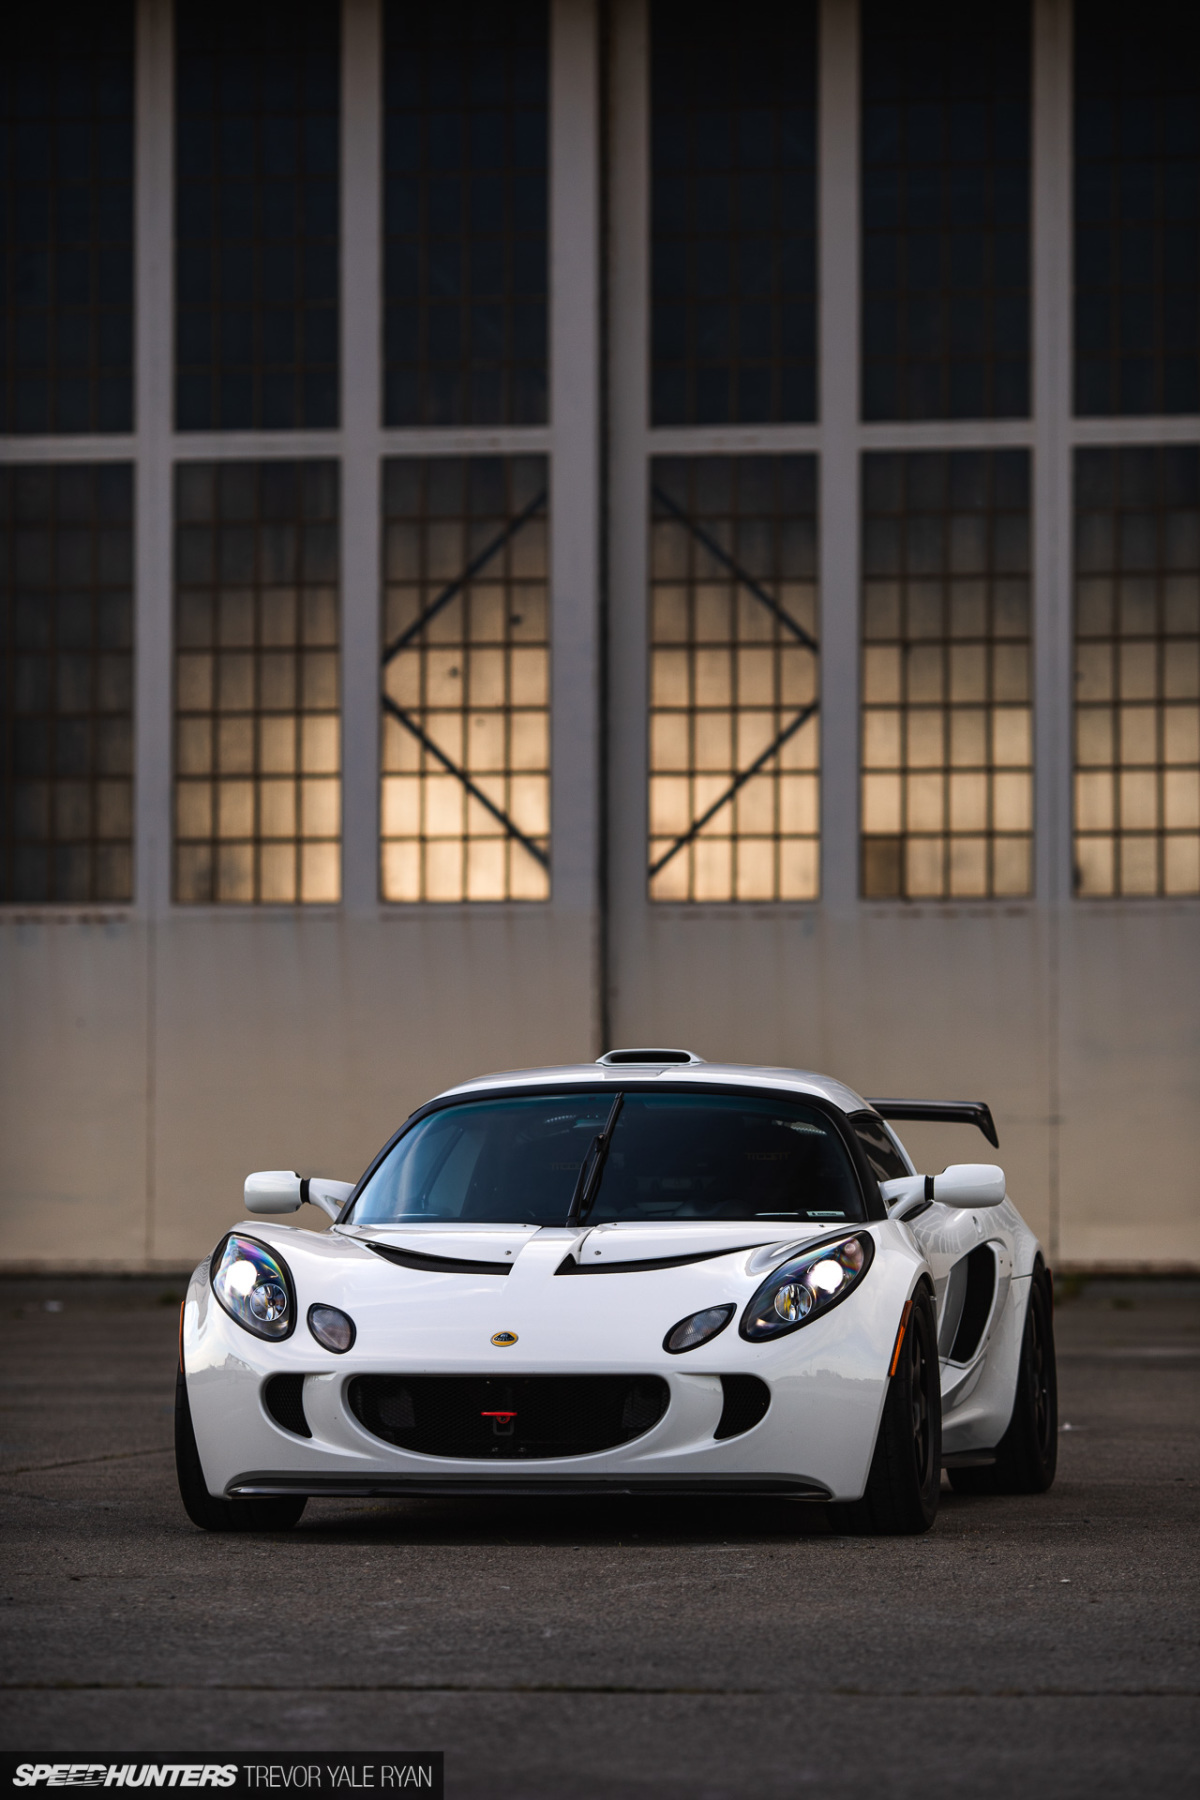 Cranking An Exige S Street Car Up To 11 - Speedhunters